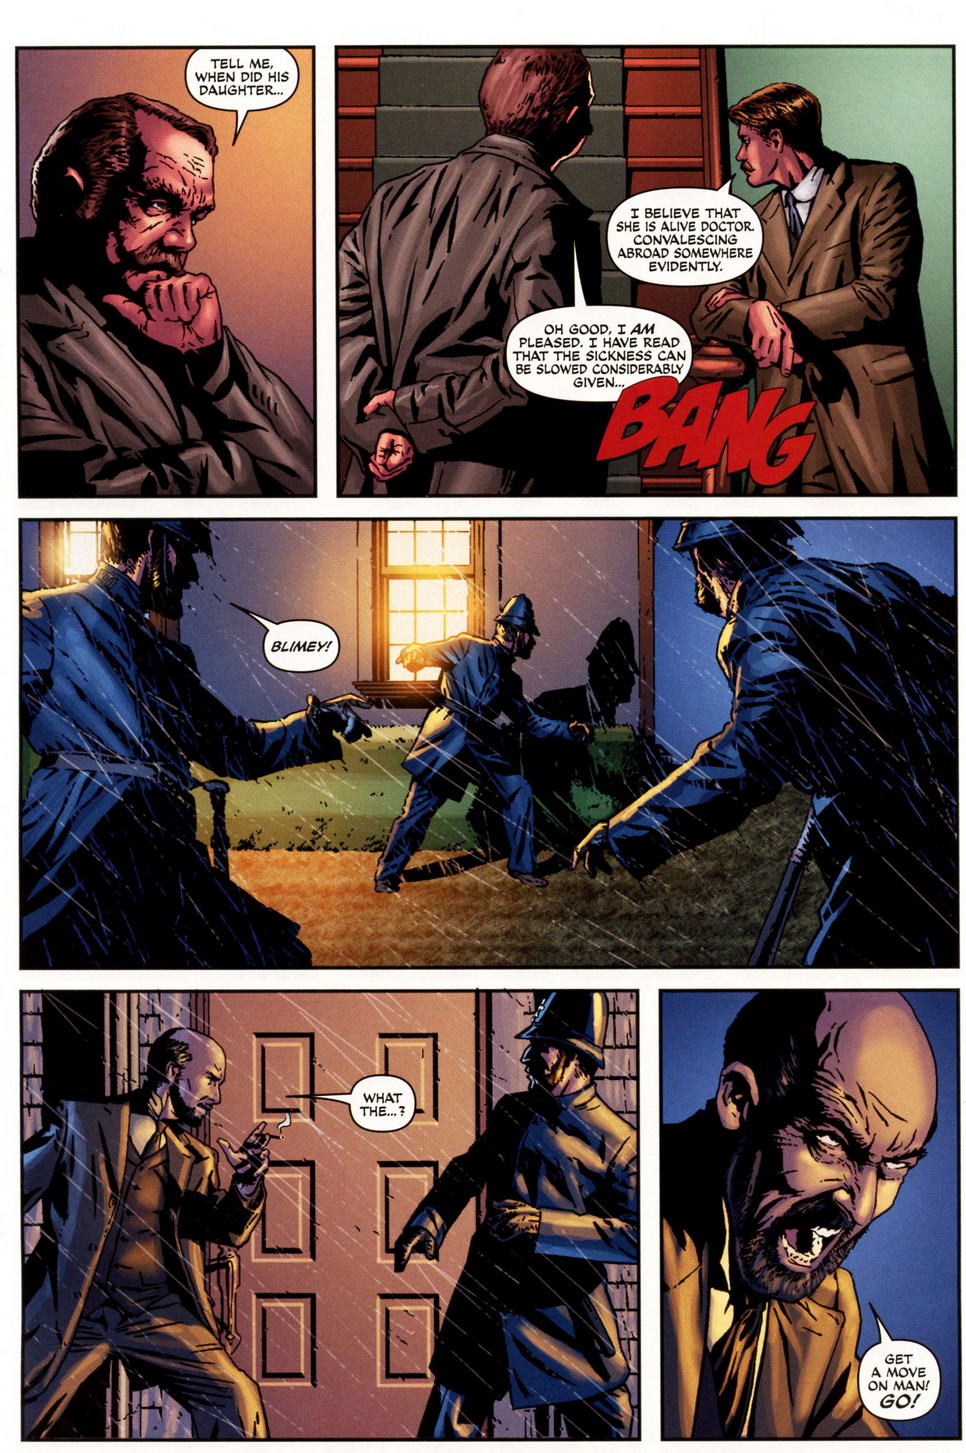 Sherlock Holmes (2009) issue 1 - Page 22